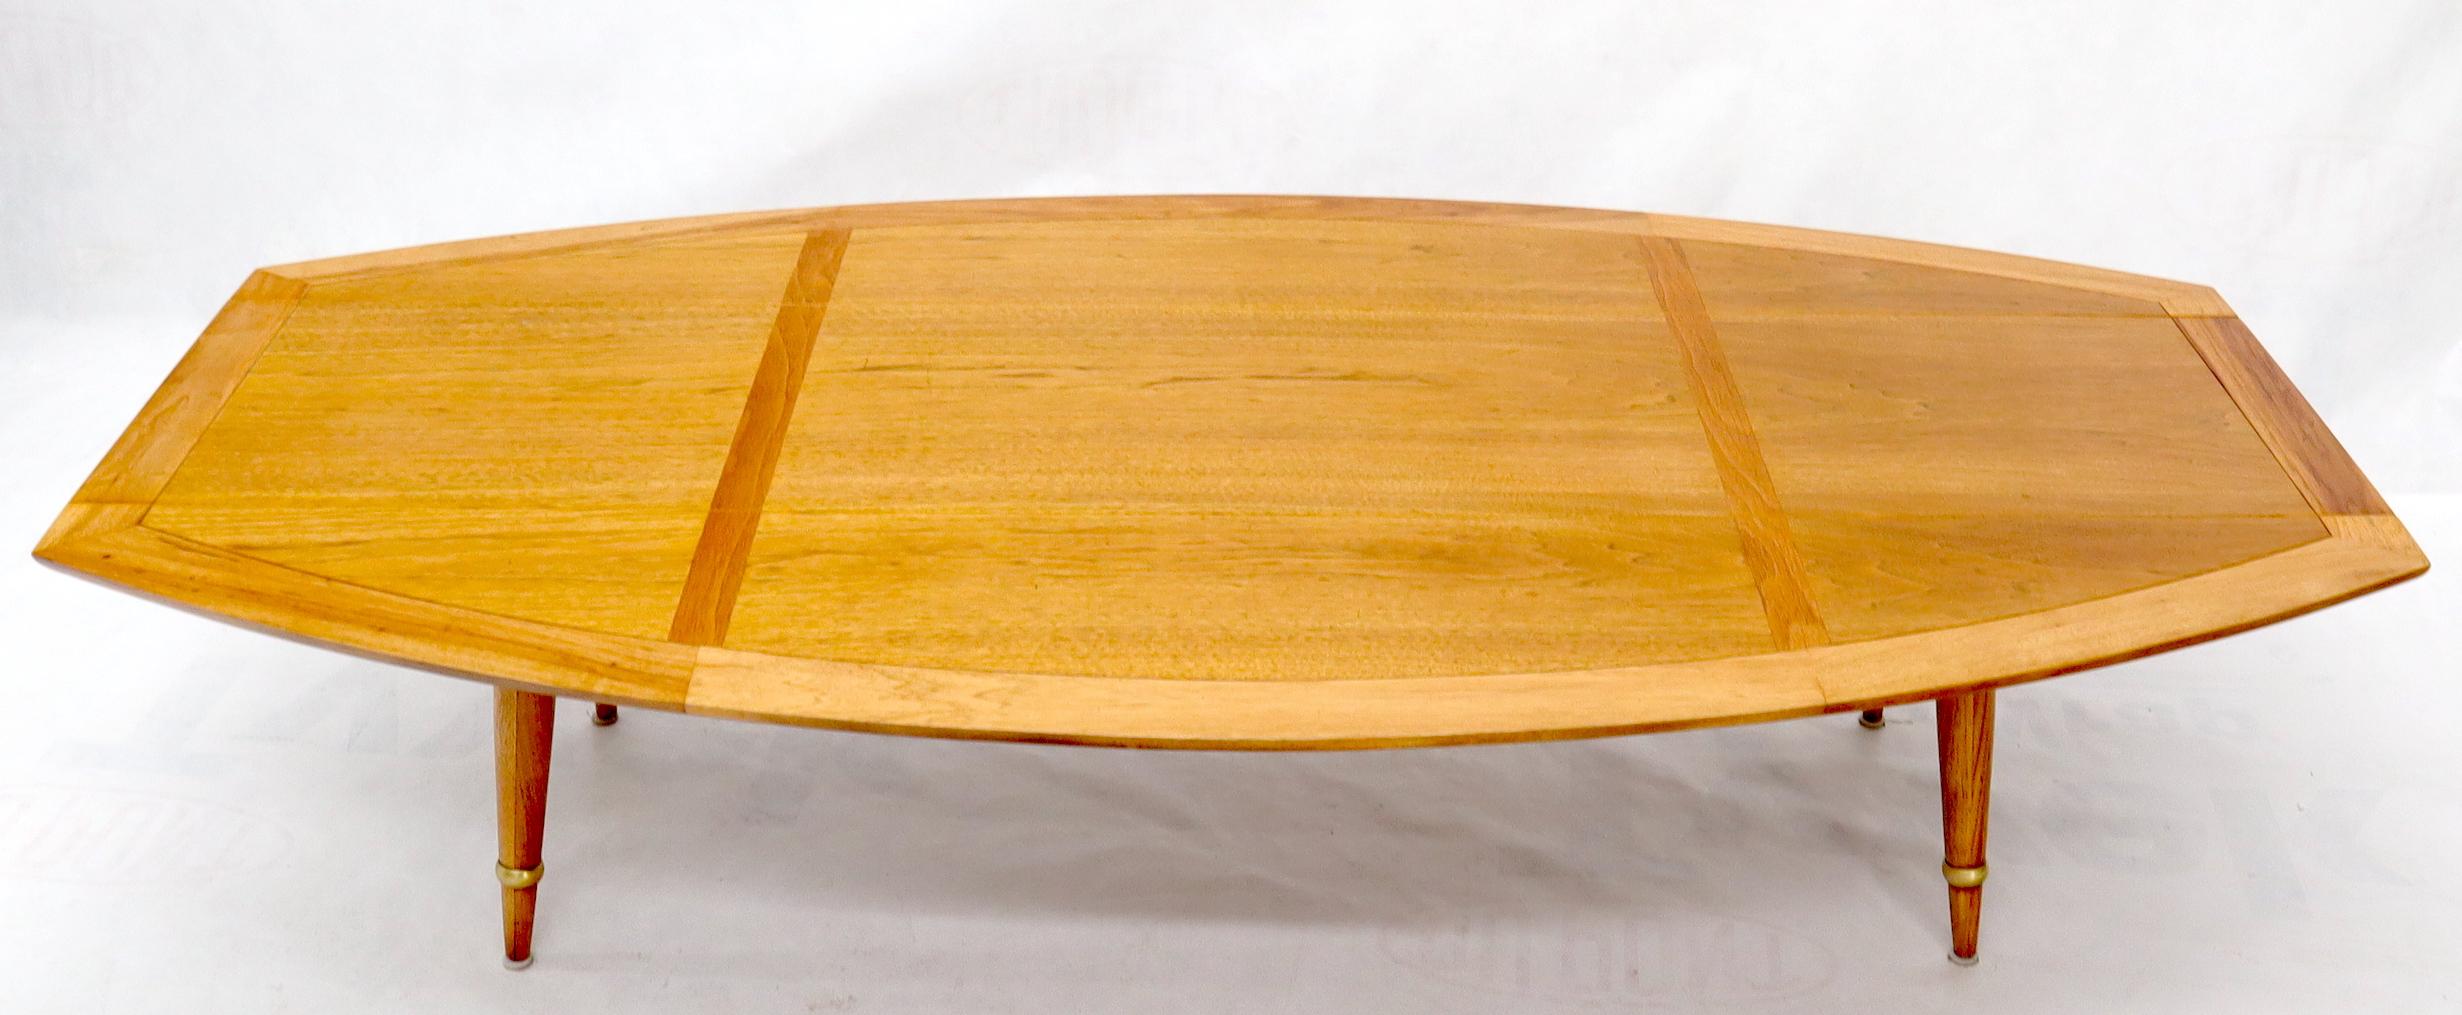 Boat Shape Large Drop Leaf Expandable Coffee Table In Excellent Condition For Sale In Rockaway, NJ